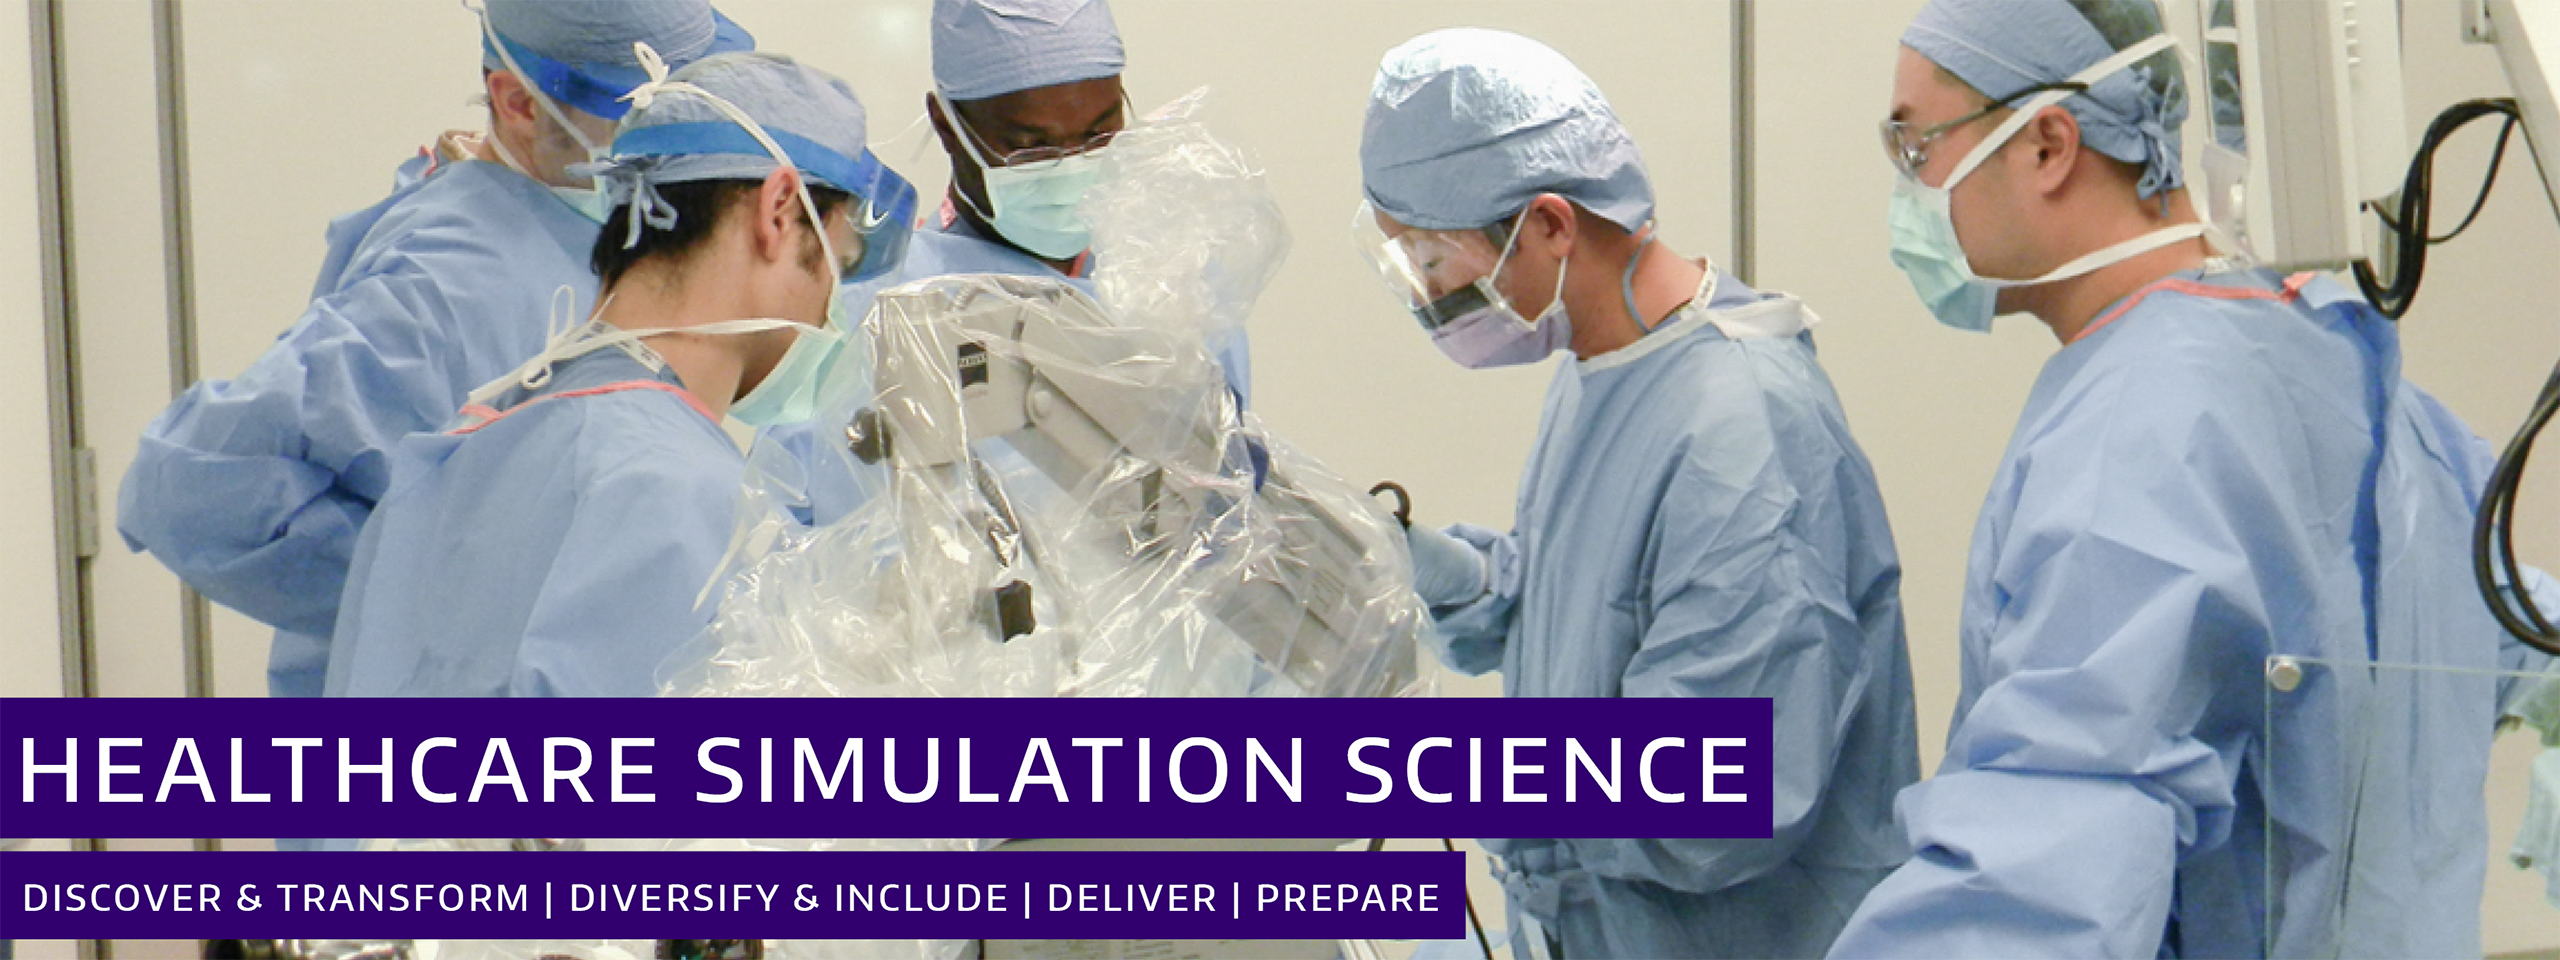 Department of Surgery Division of Healthcare Simulation Science Header Image